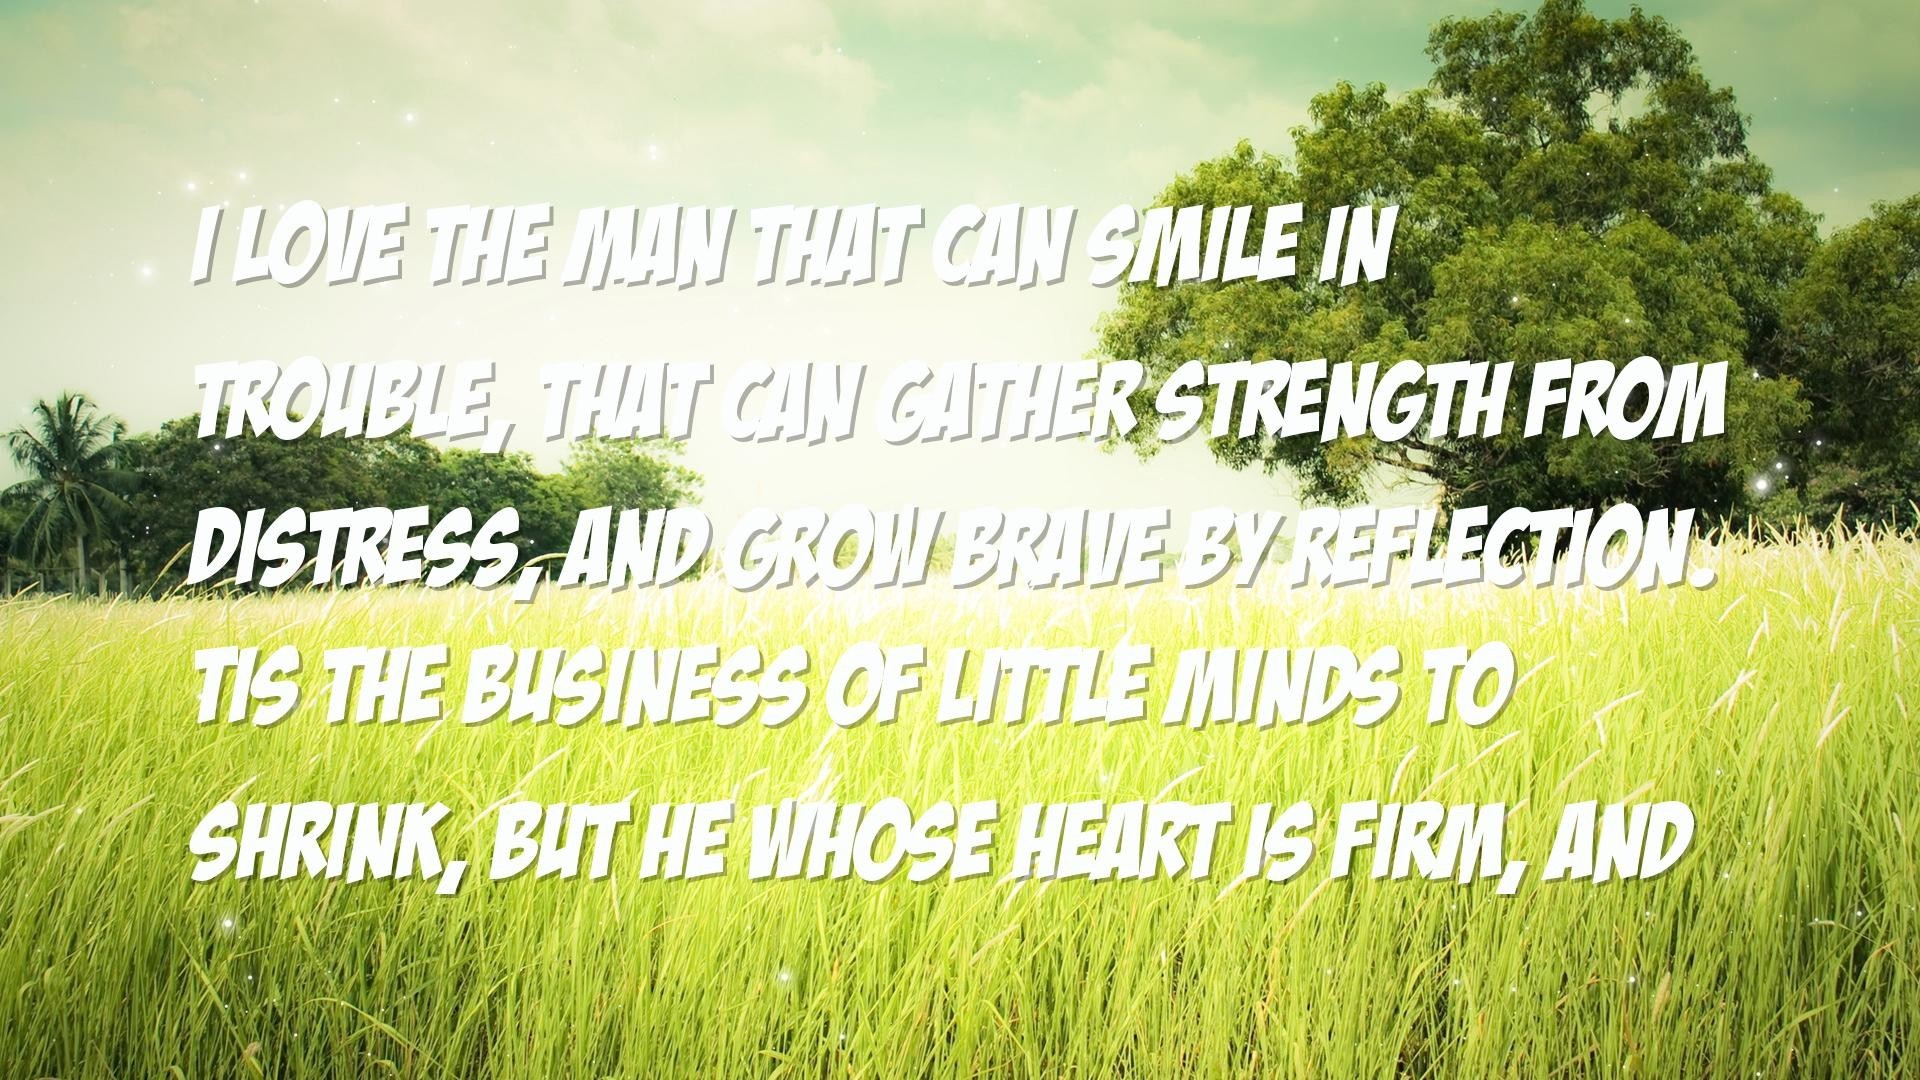 1920x1080 will, love hurts Quotes Wallpapers - I love the man that can smile in  trouble, that can gather strength from distress, and grow brave by  reflection.